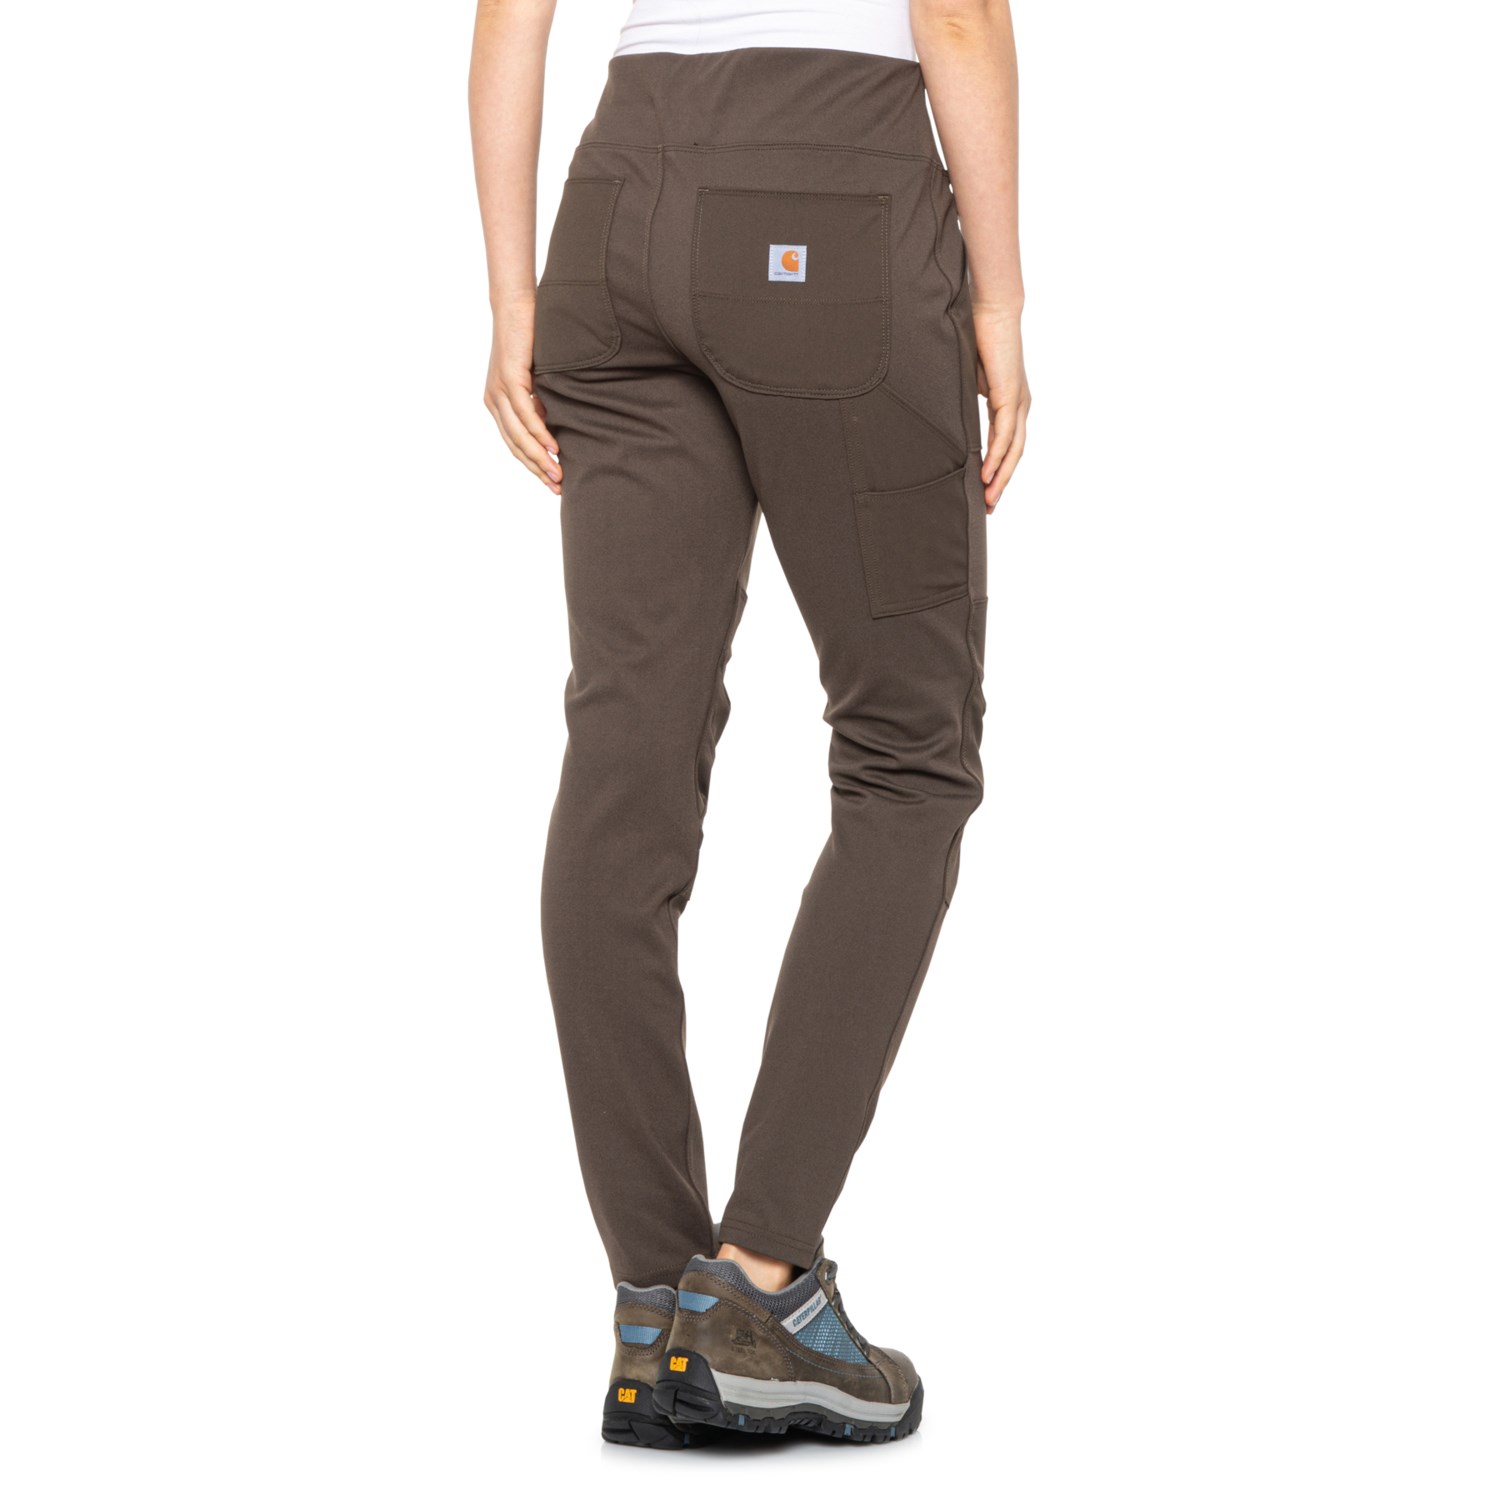 Carhartt leggings with lots of pockets  Carhartt leggings, Carhartt women,  Outwear women